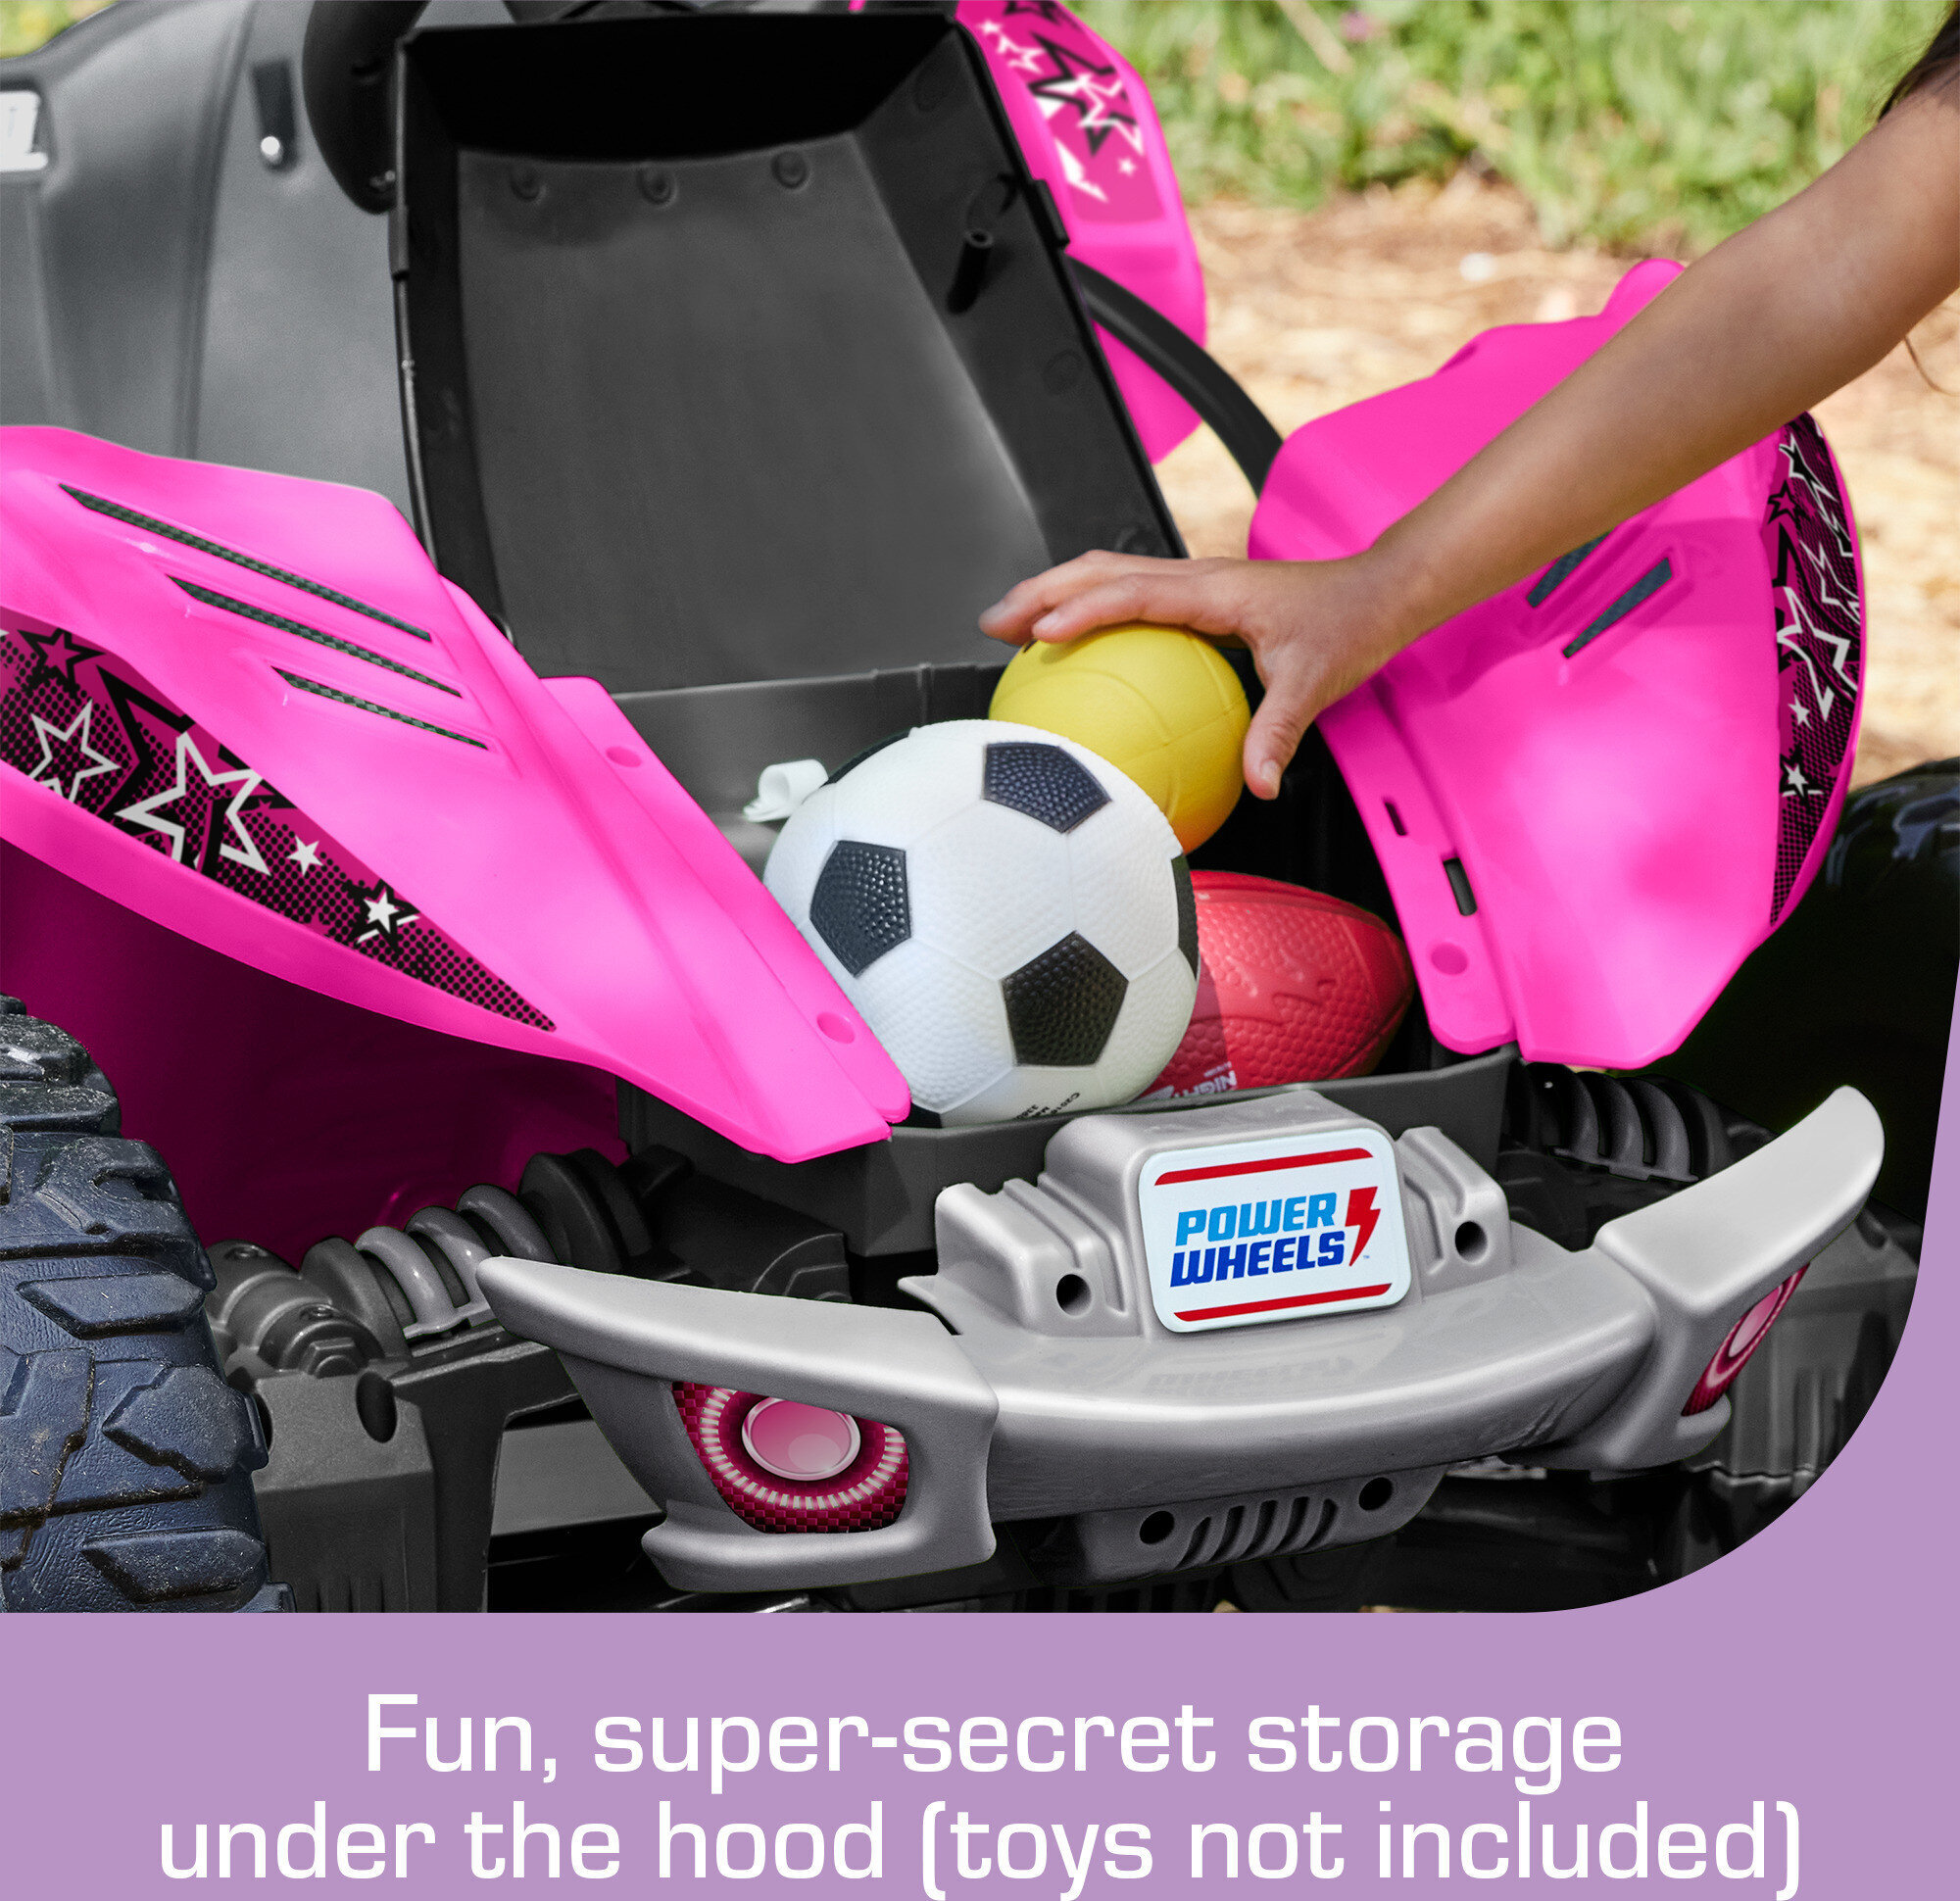 Power Wheels Dune Racer Extreme Battery-Powered Ride-on Vehicle with Charger, Pink, 12 V, Max Speed: 5 mph - image 4 of 7